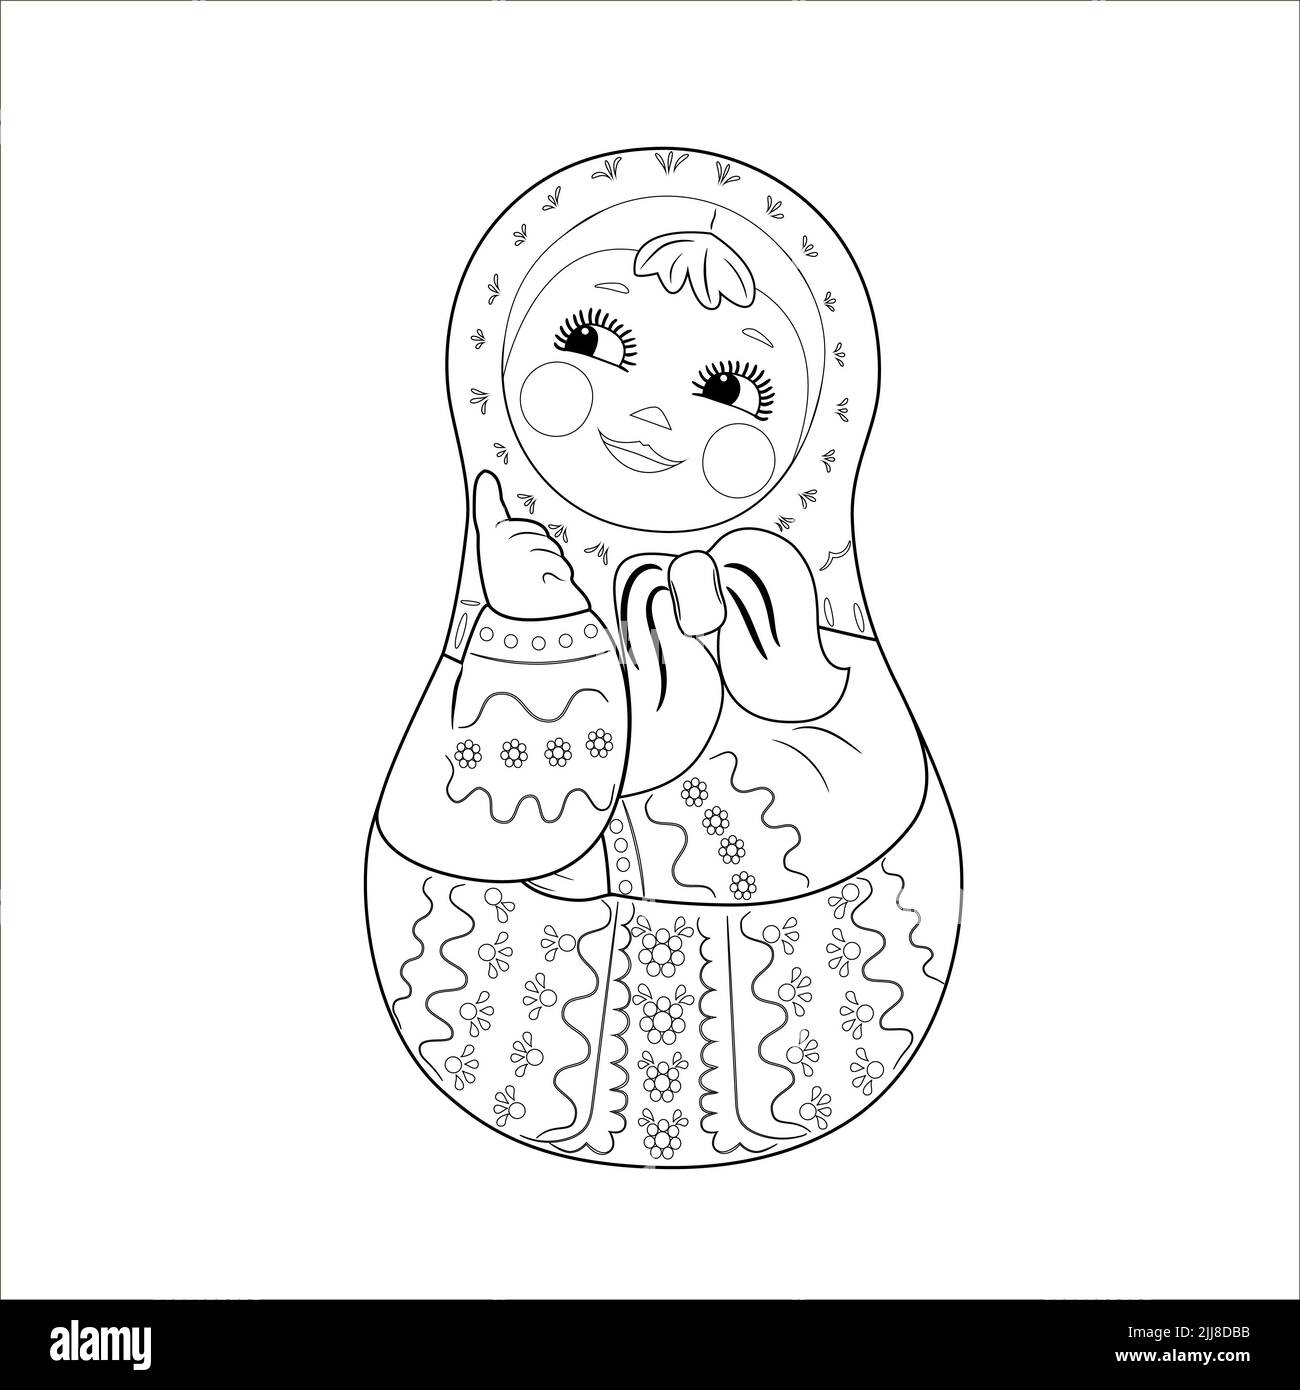 Matryoshka doll in doodle style. isolated with a Russian doll. Stock Photo